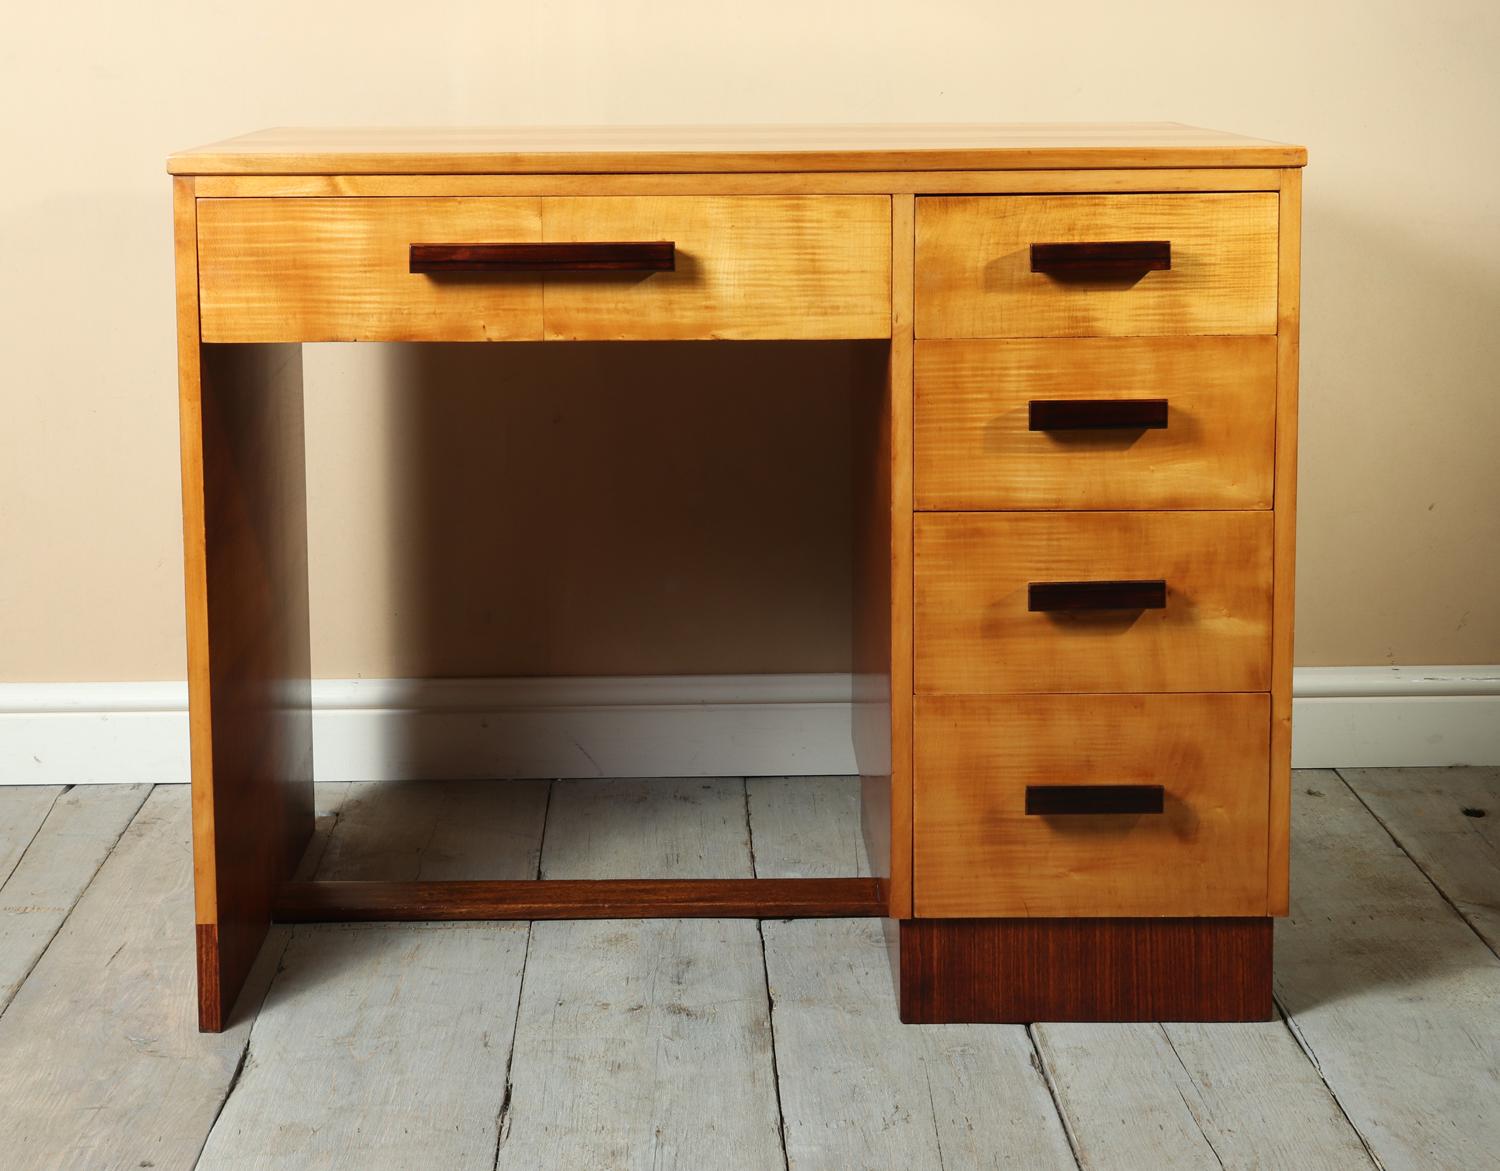 Art Deco desk in sycamore circa 1930
A Very good quality Art Deco desk produced in England in the 1930s in sycamore and rosewood, it has five drawers with dovetail joint construction the desk is in excellent condition throughout and has been fully